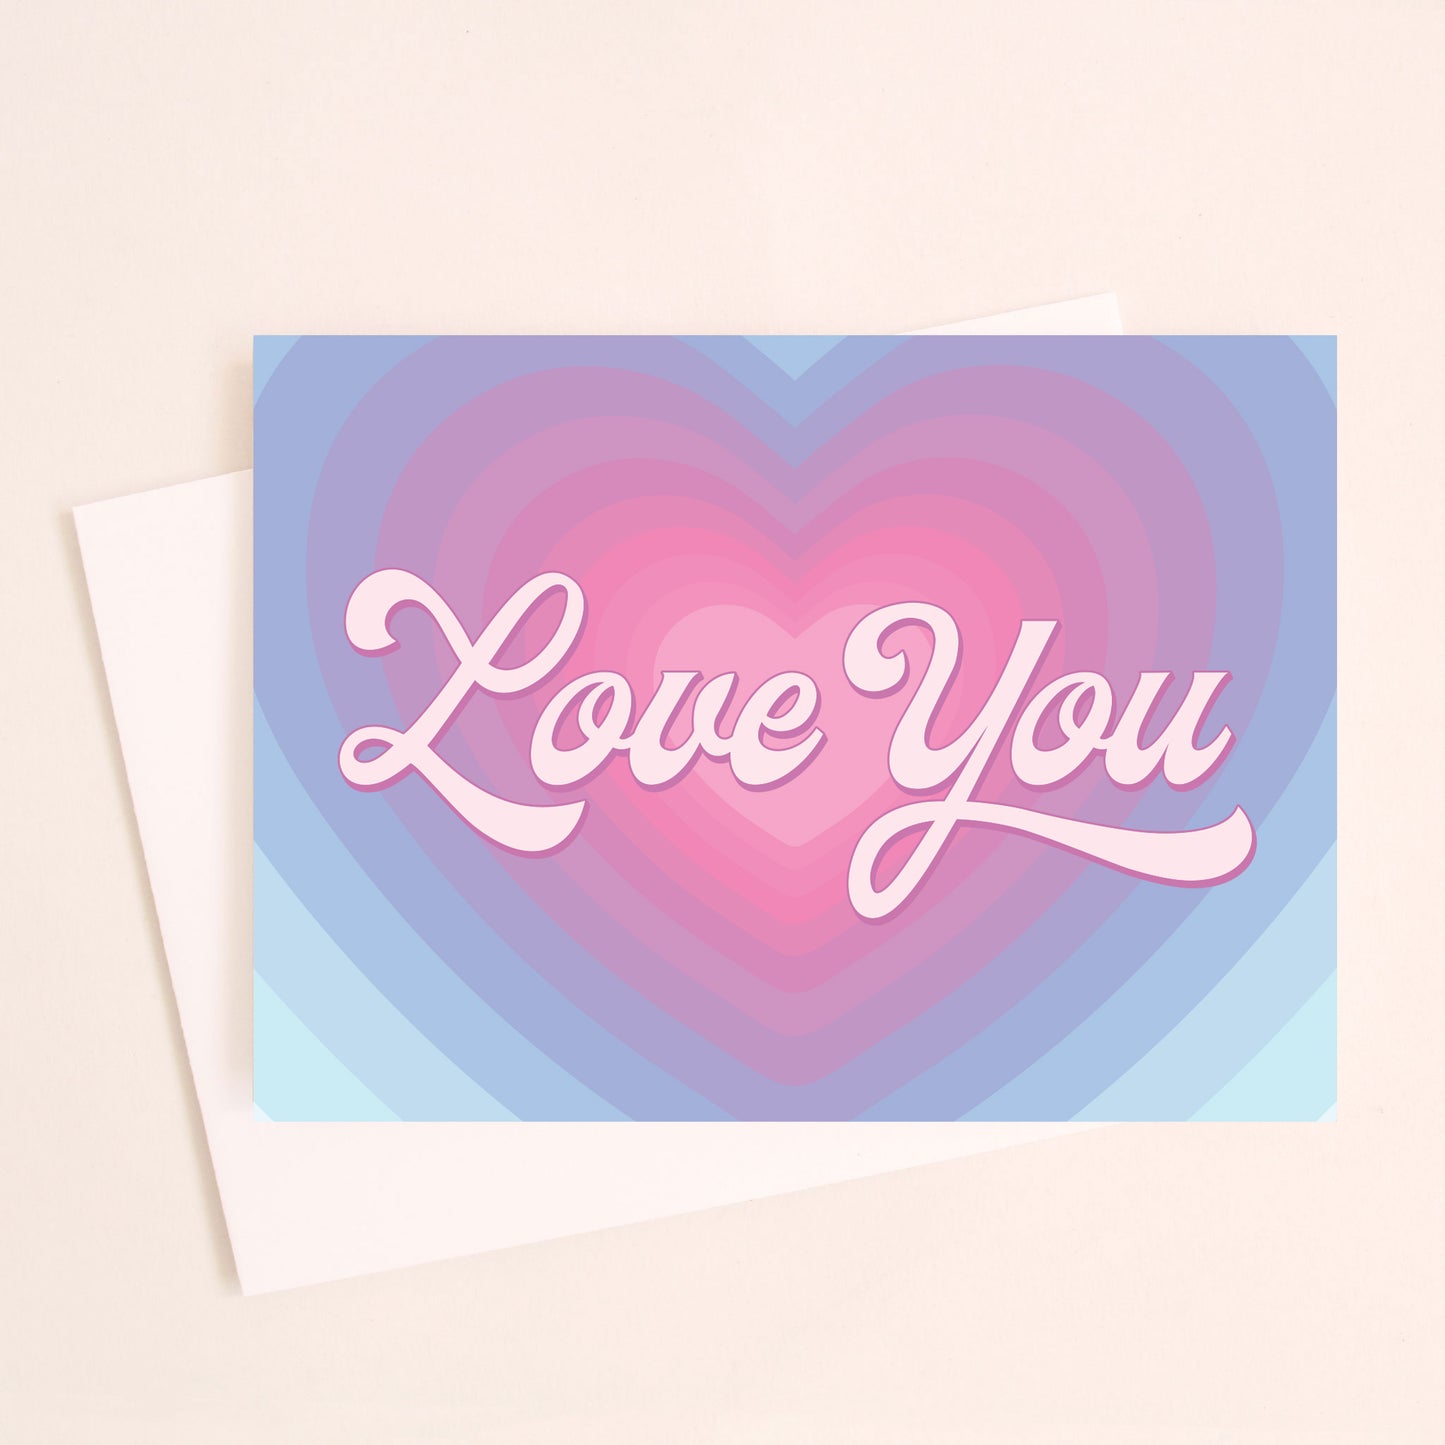 A gradient heart design transitioning from light pinks to shades and purple and then shades of blue up until the edge of the card. In the center there is text that reads, "Love You". Also included is a coordinating white envelope.